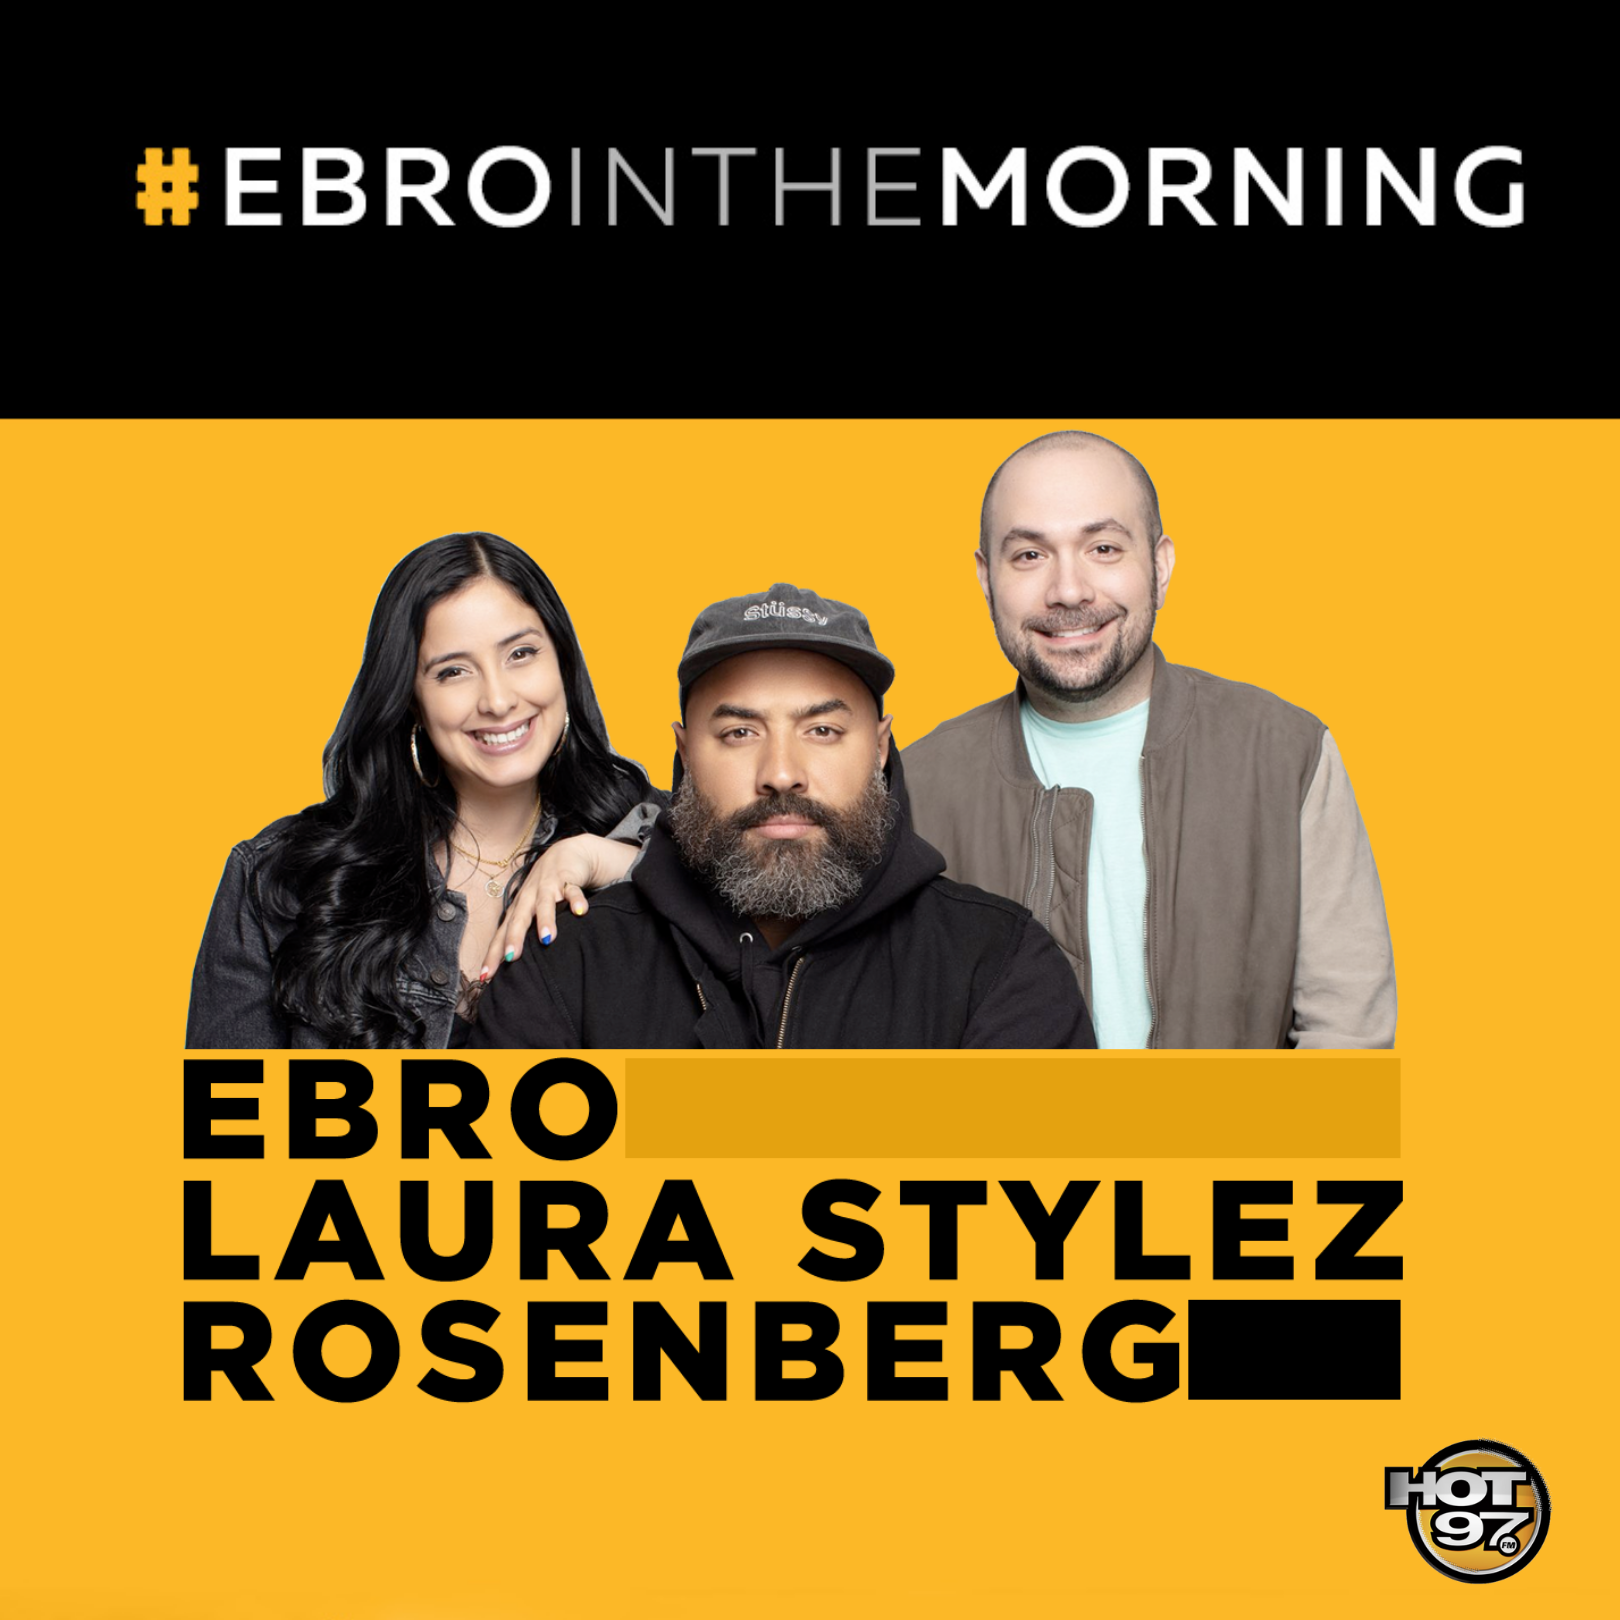 Rosenberg Gets WILD + Dissecting the Media Landscape | Ebro in the Morning LIVE After The Live Program-Show